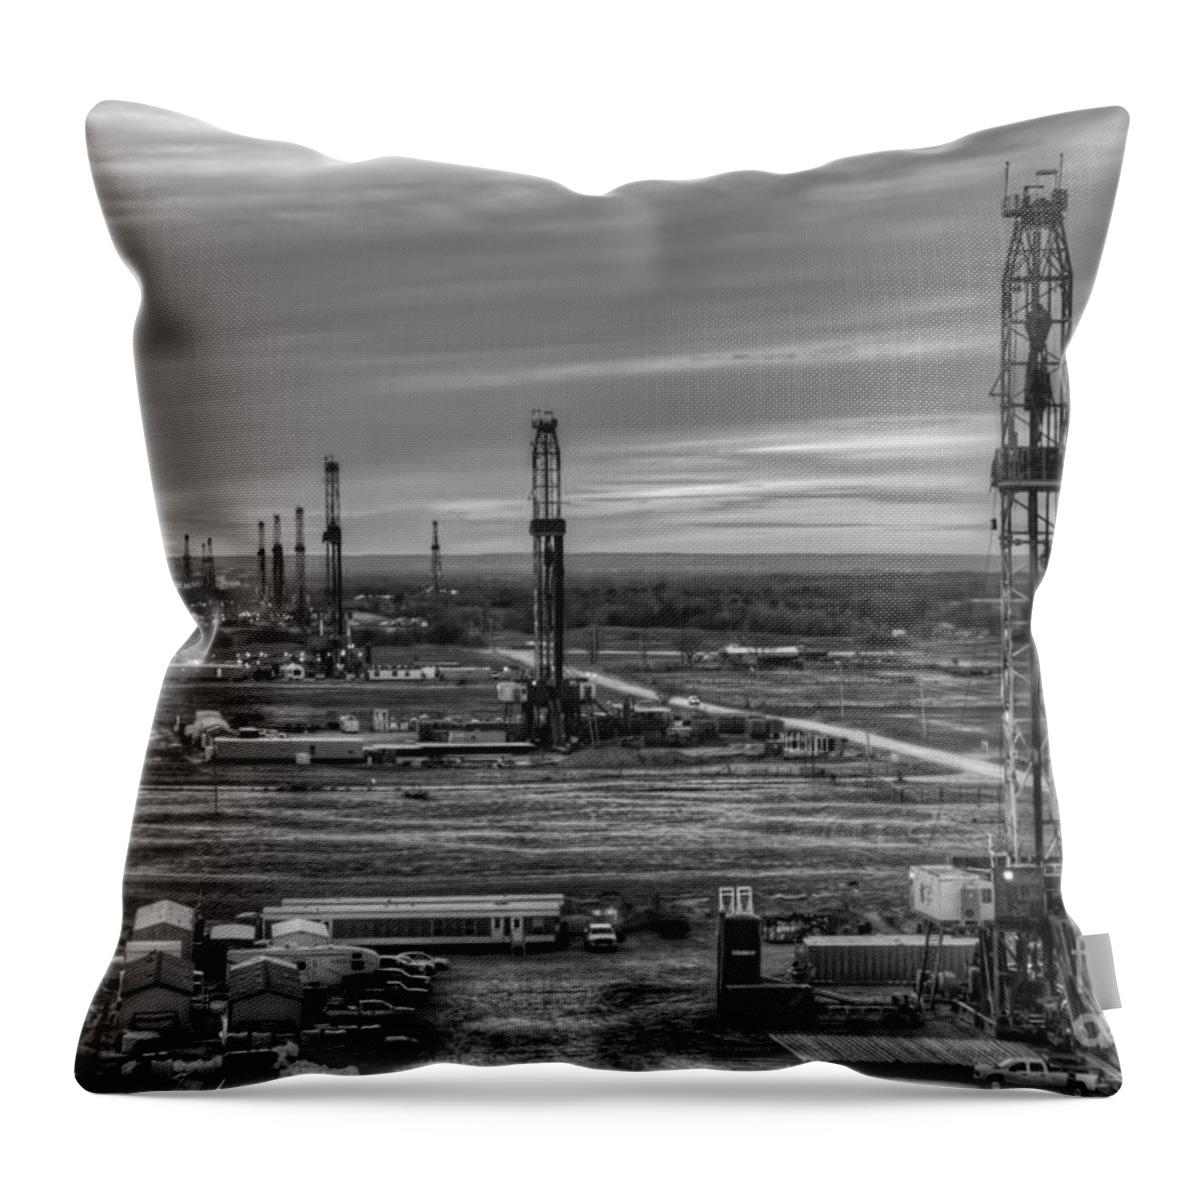 Oil Rig Throw Pillow featuring the photograph Cim003bw-10 by Cooper Ross